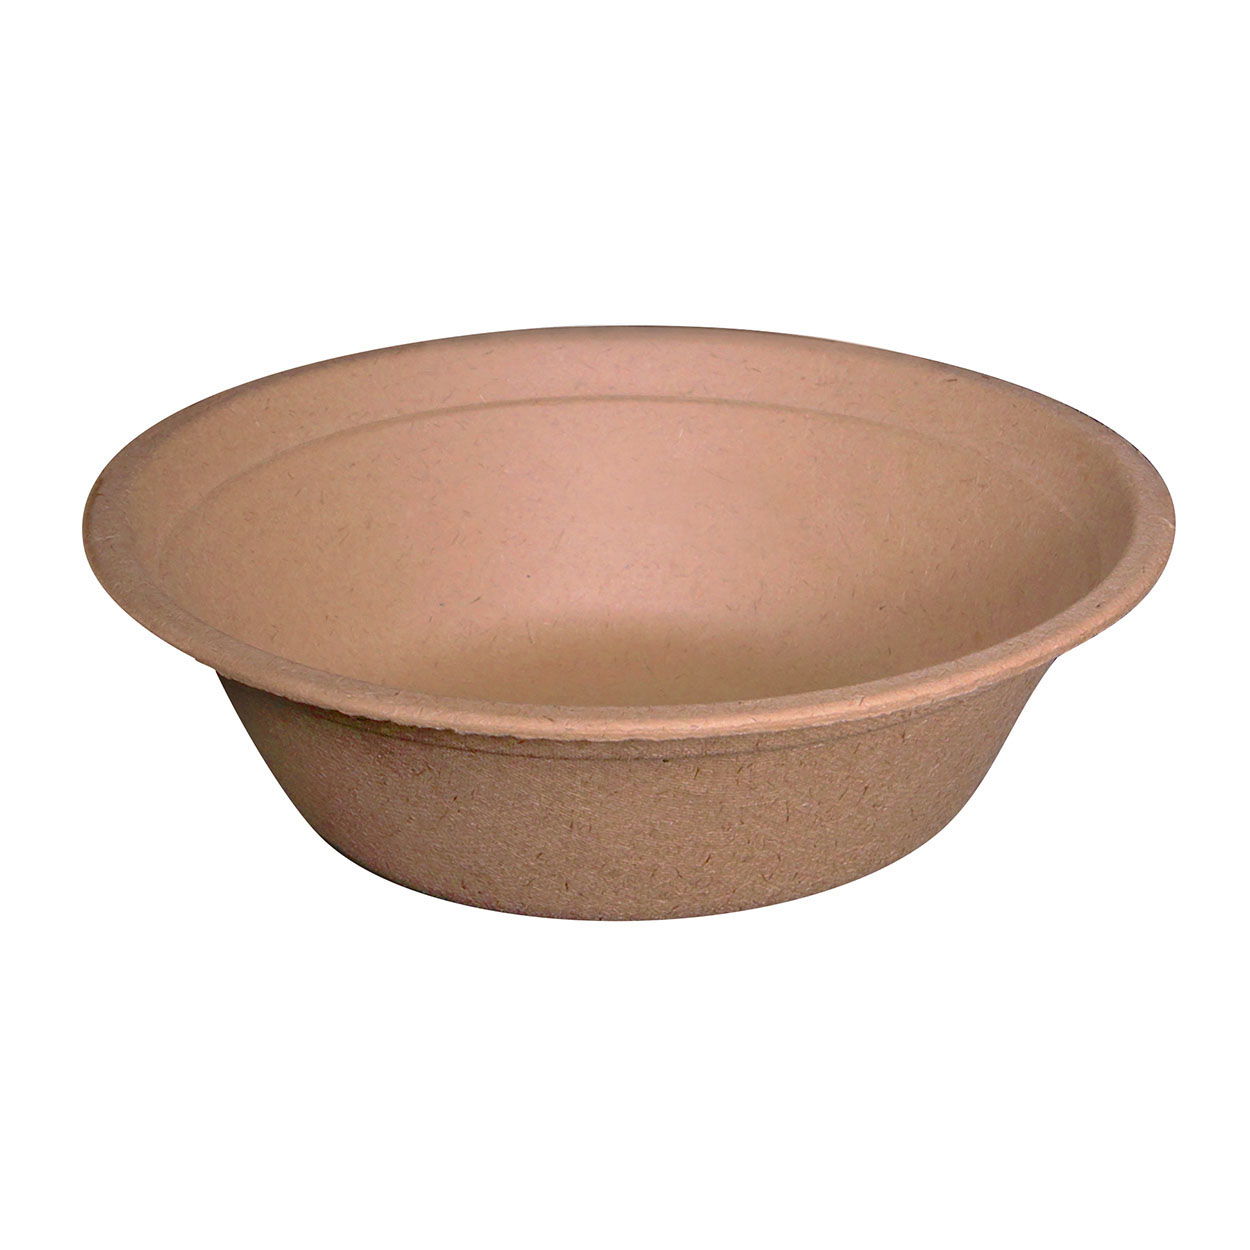 125-Pack Paper Bowls Heavy-Duty Quality Natural Dispos Details about   100% Compostable 12 oz 